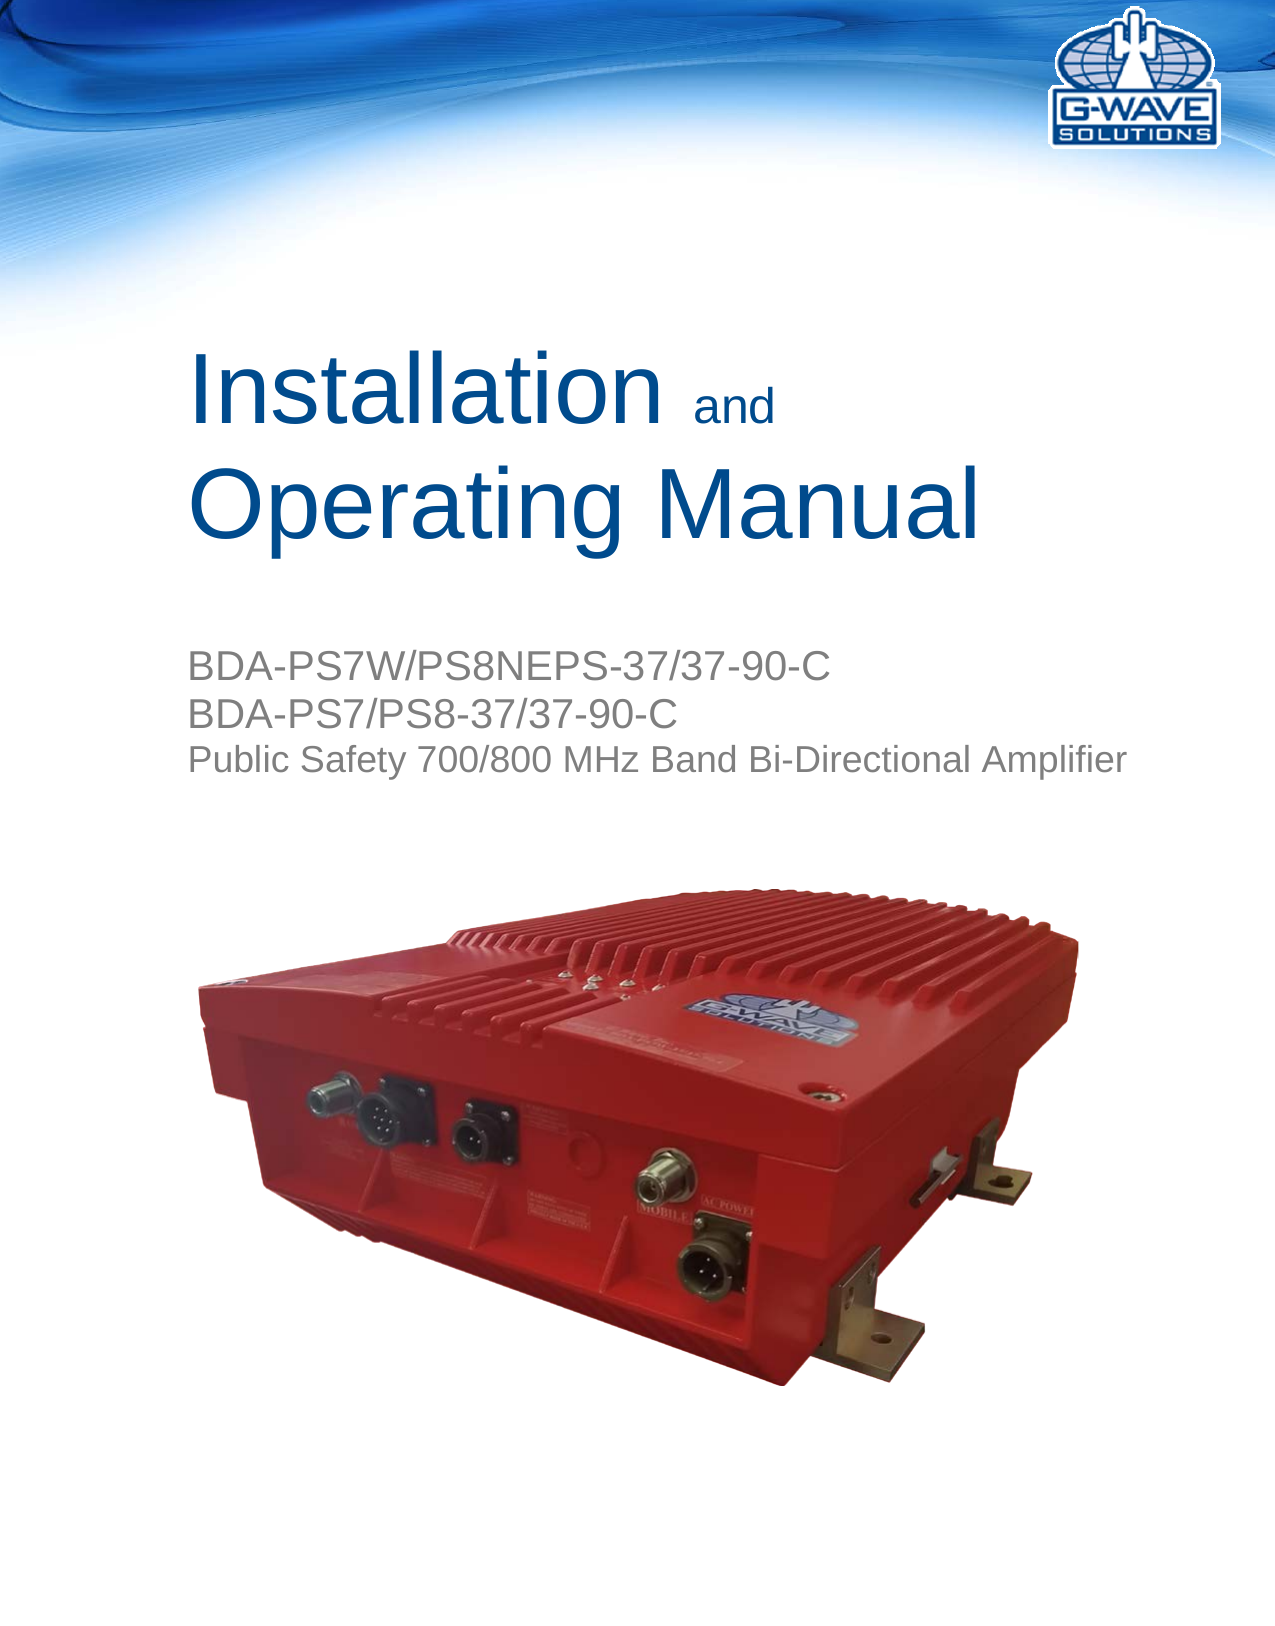       Installation and Operating Manual    BDA-PS7W/PS8NEPS-37/37-90-C BDA-PS7/PS8-37/37-90-C  Public Safety 700/800 MHz Band Bi-Directional Amplifier    